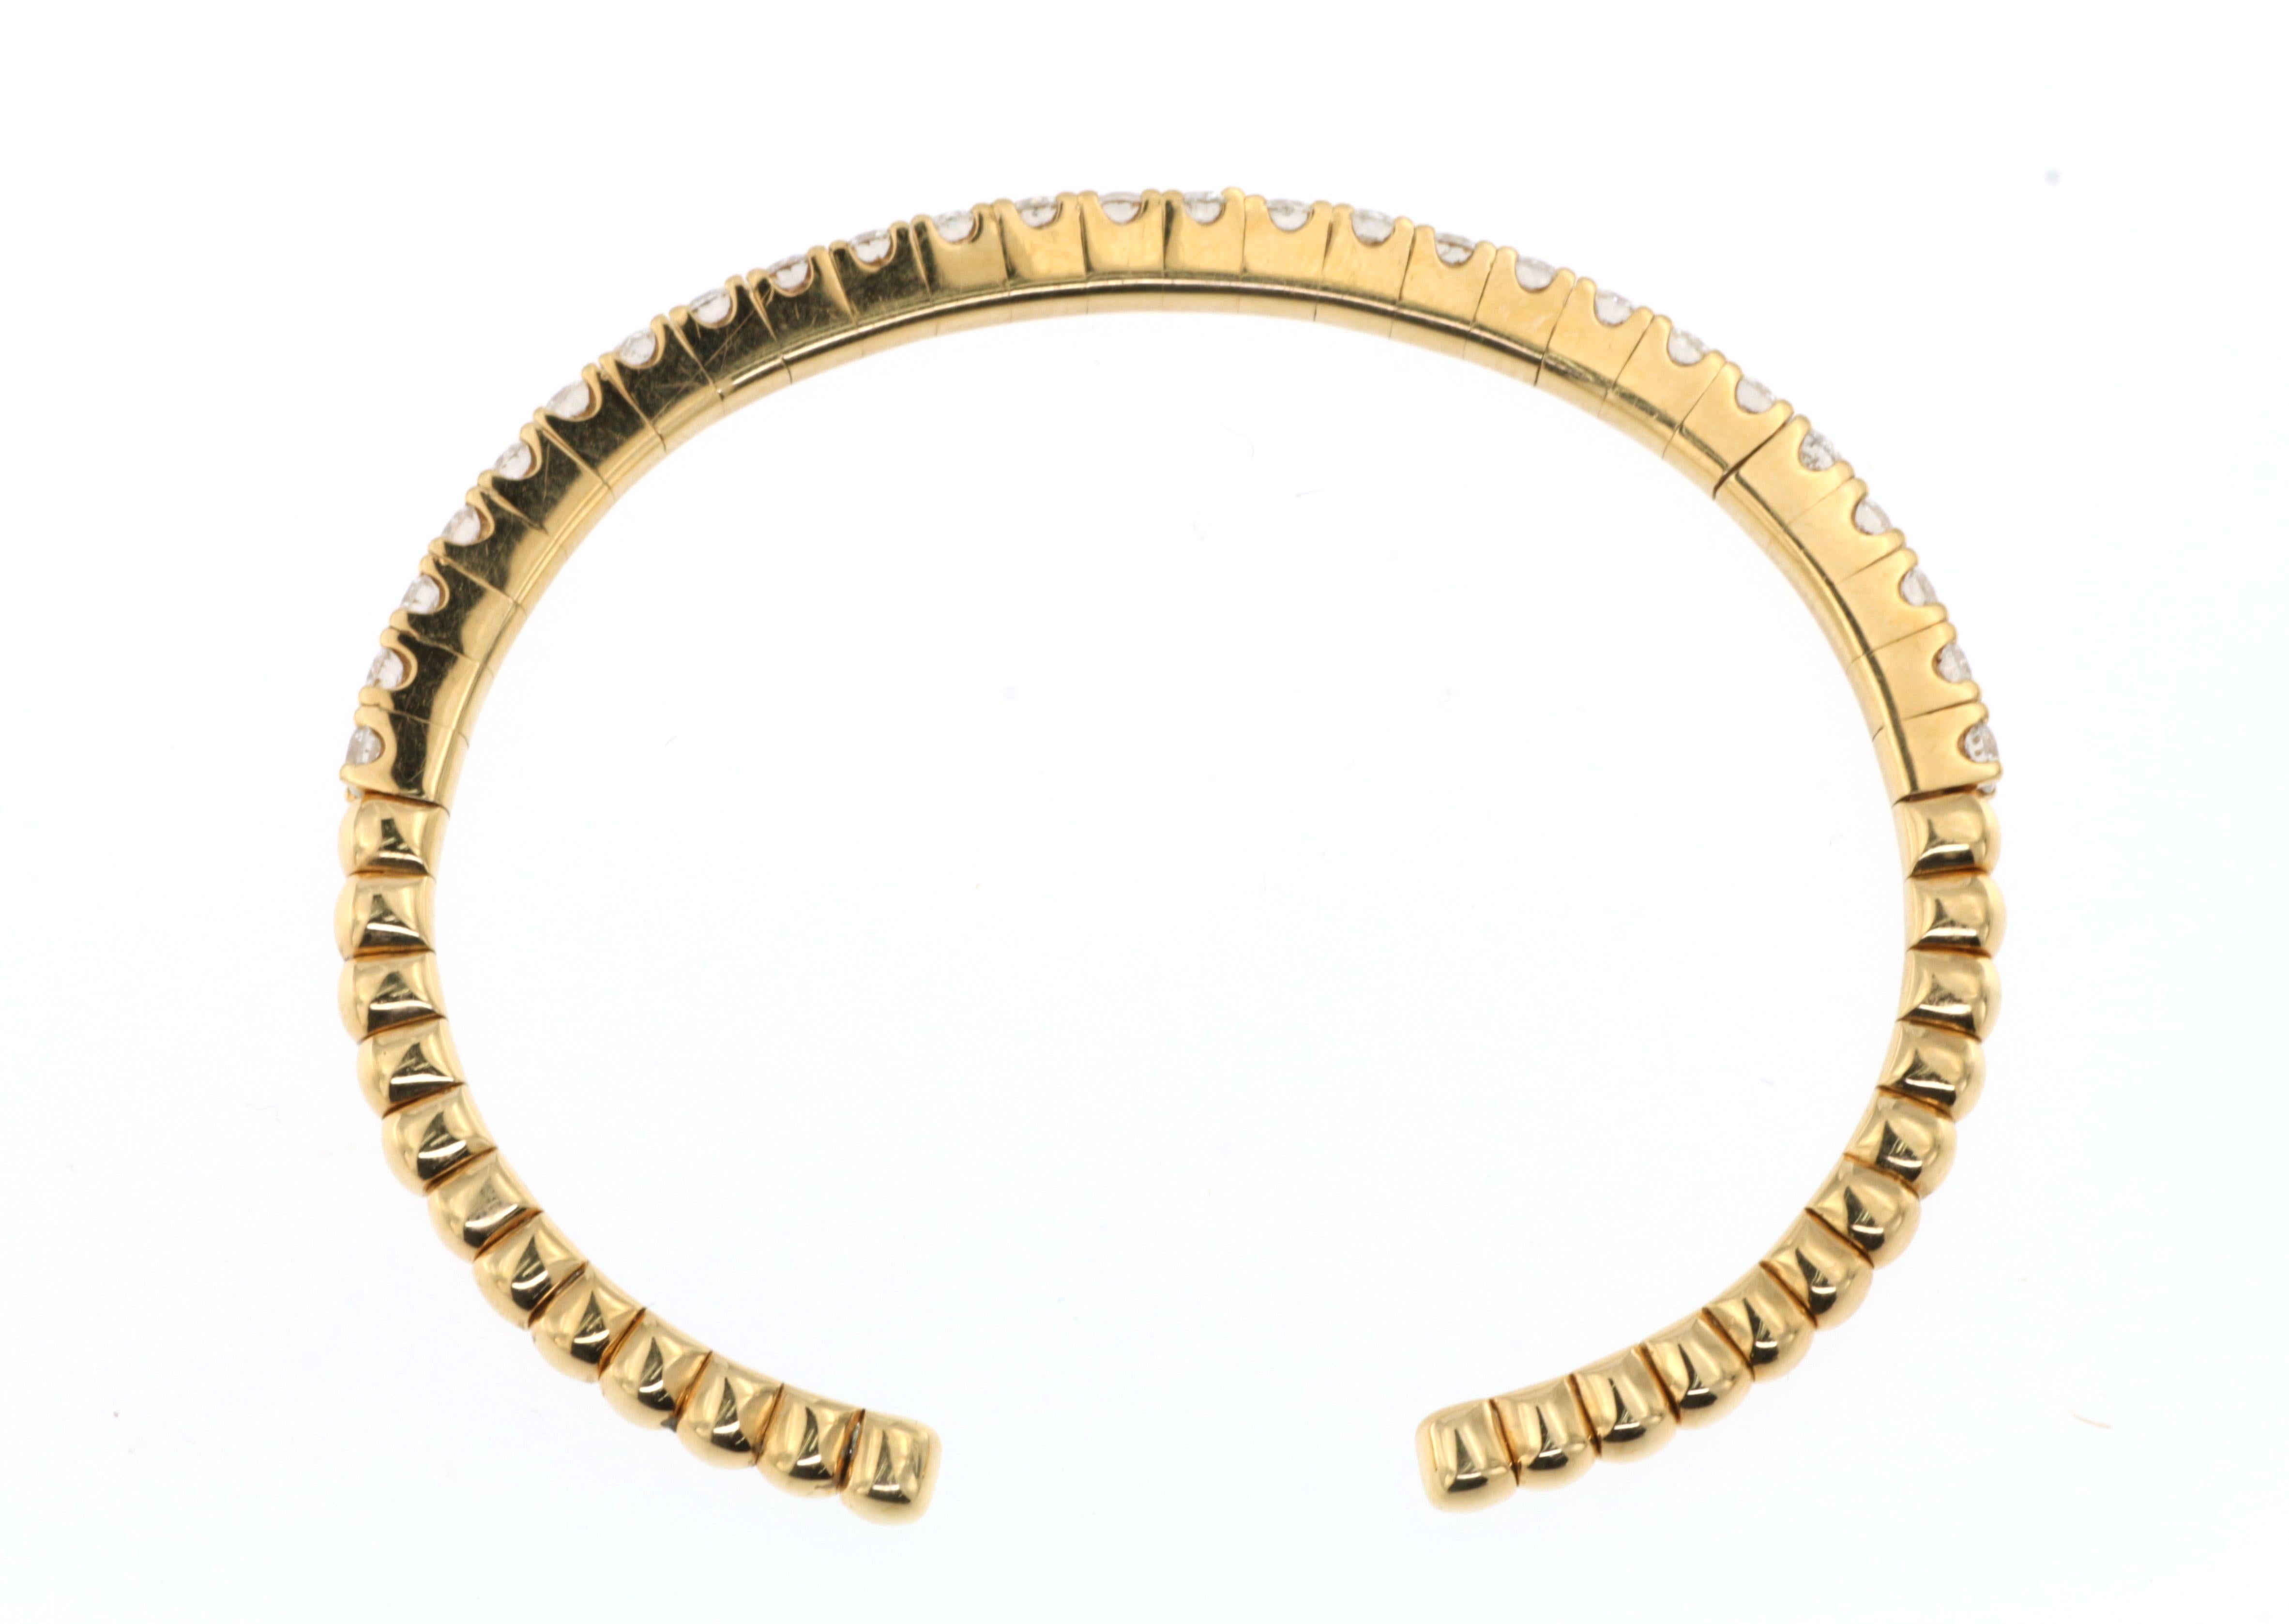 26 round brilliant cut diamonds are beautifully crafted in 18k yellow gold. Each diamond weights about 10 points/0.10 carat. Can stack with any other bracelet bangle of your choice to create a bolder look. Bracelet is a little bit flexible. Inner